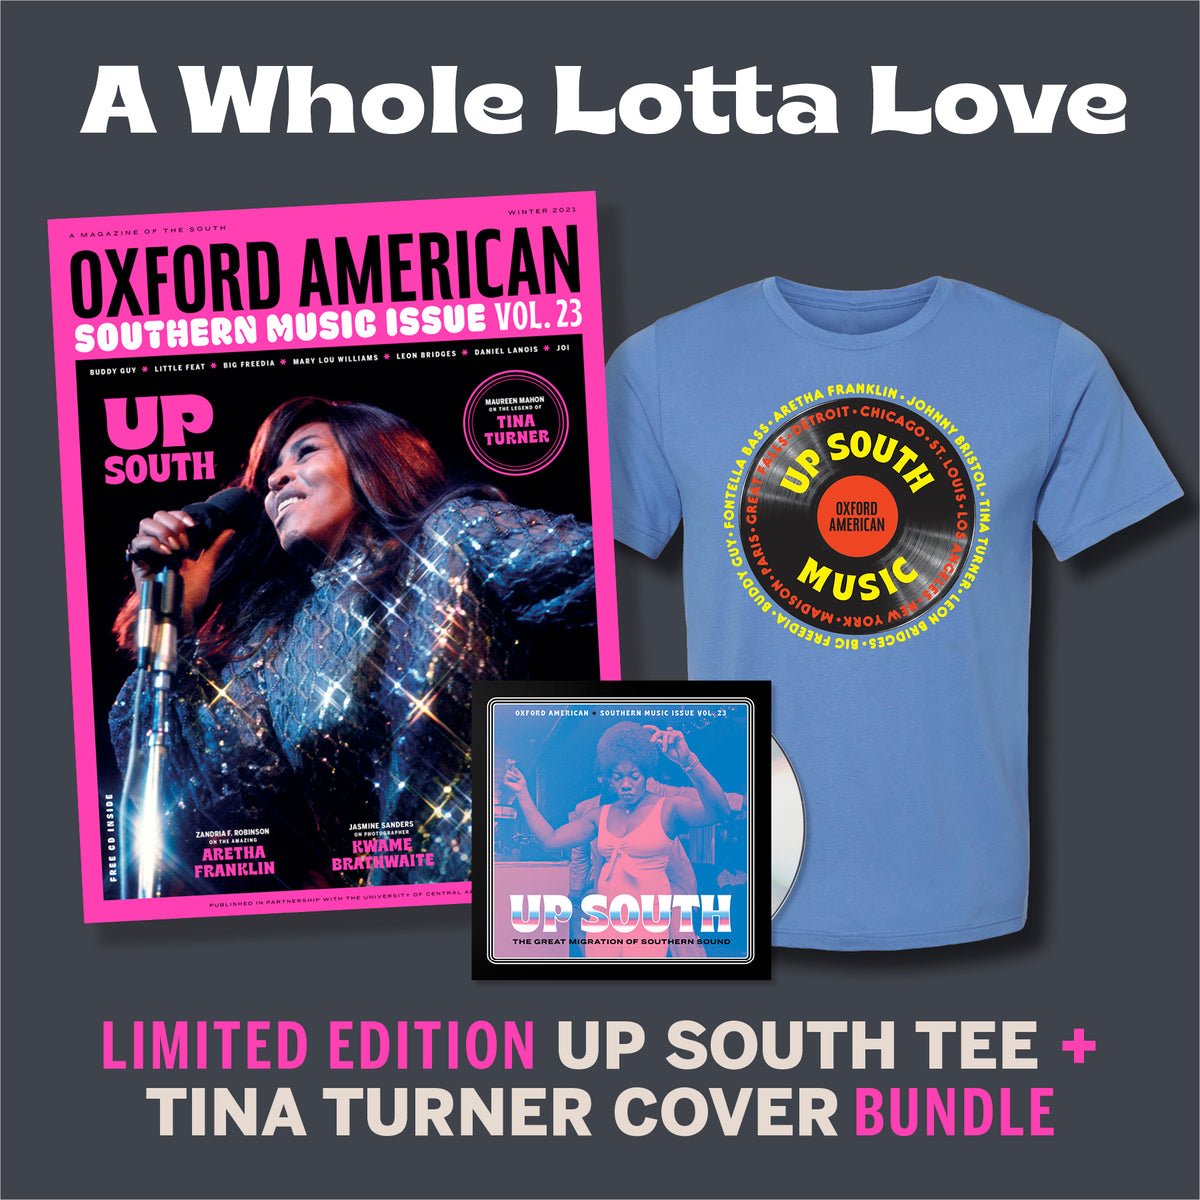 Did you order your limited edition bundles yet? We've brought back